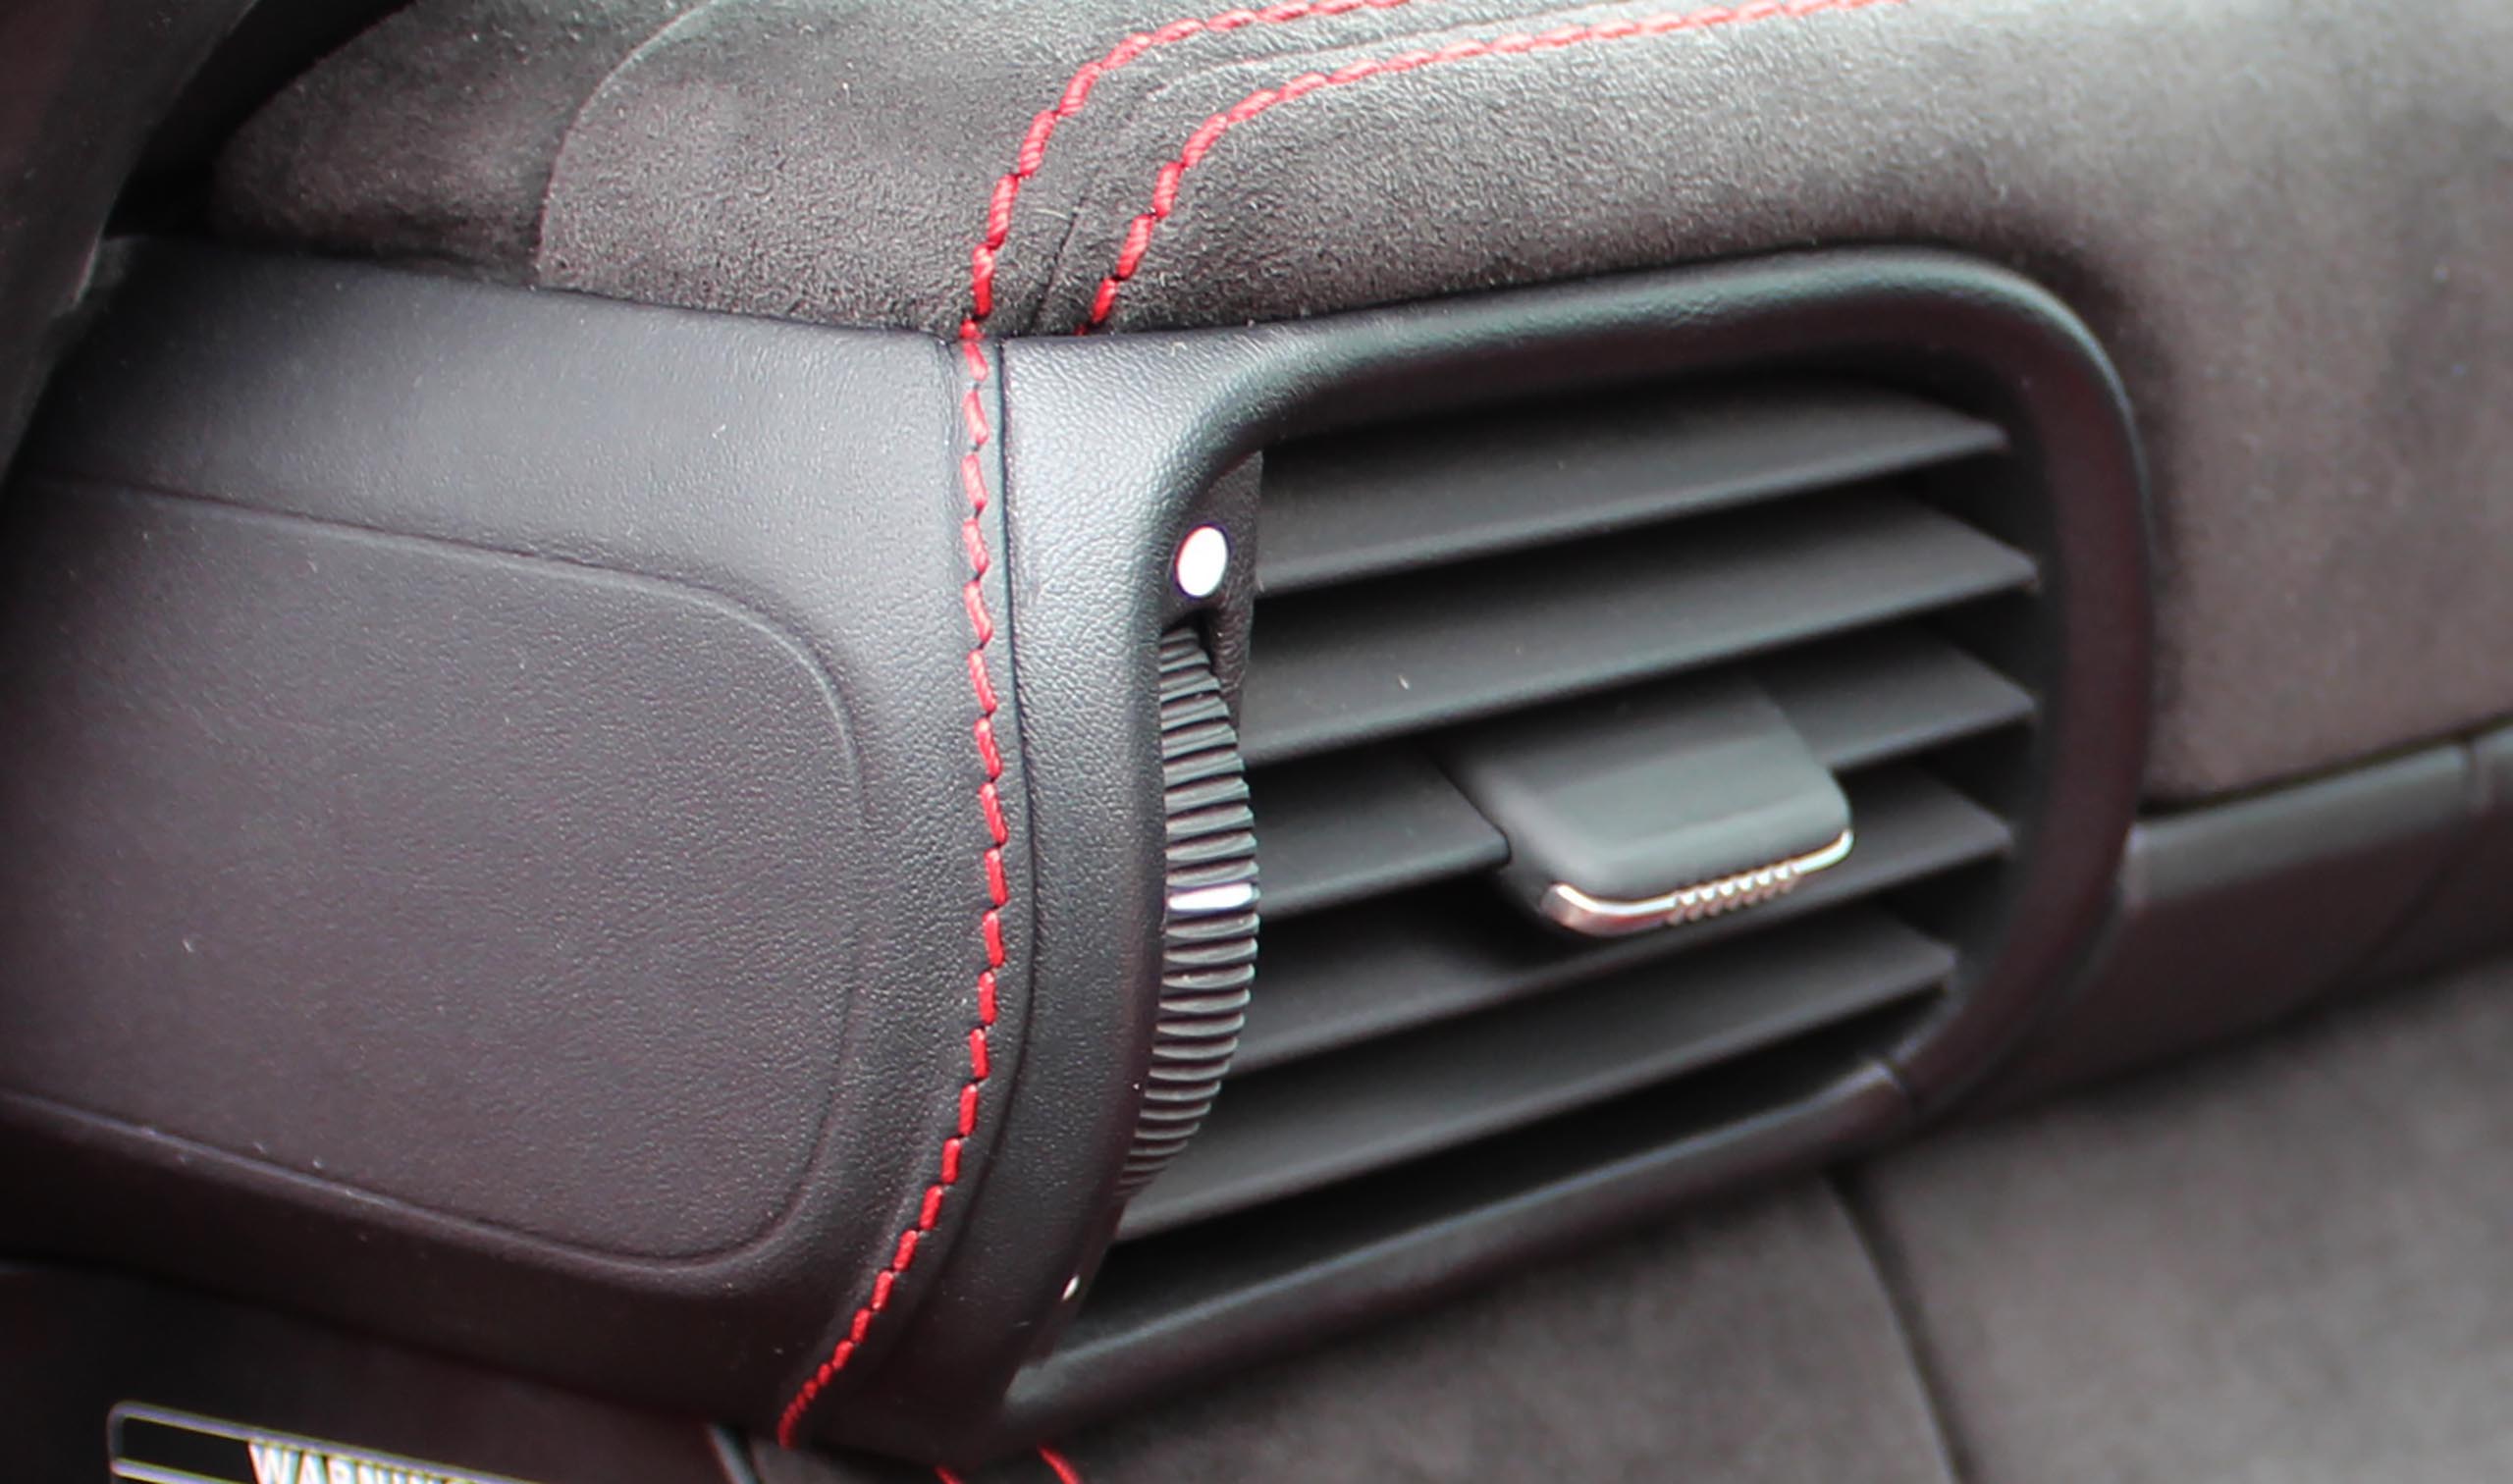 Porsche 911 997 gt3 extended leather dashboard side air vent in black leather with red stitching by Designls 